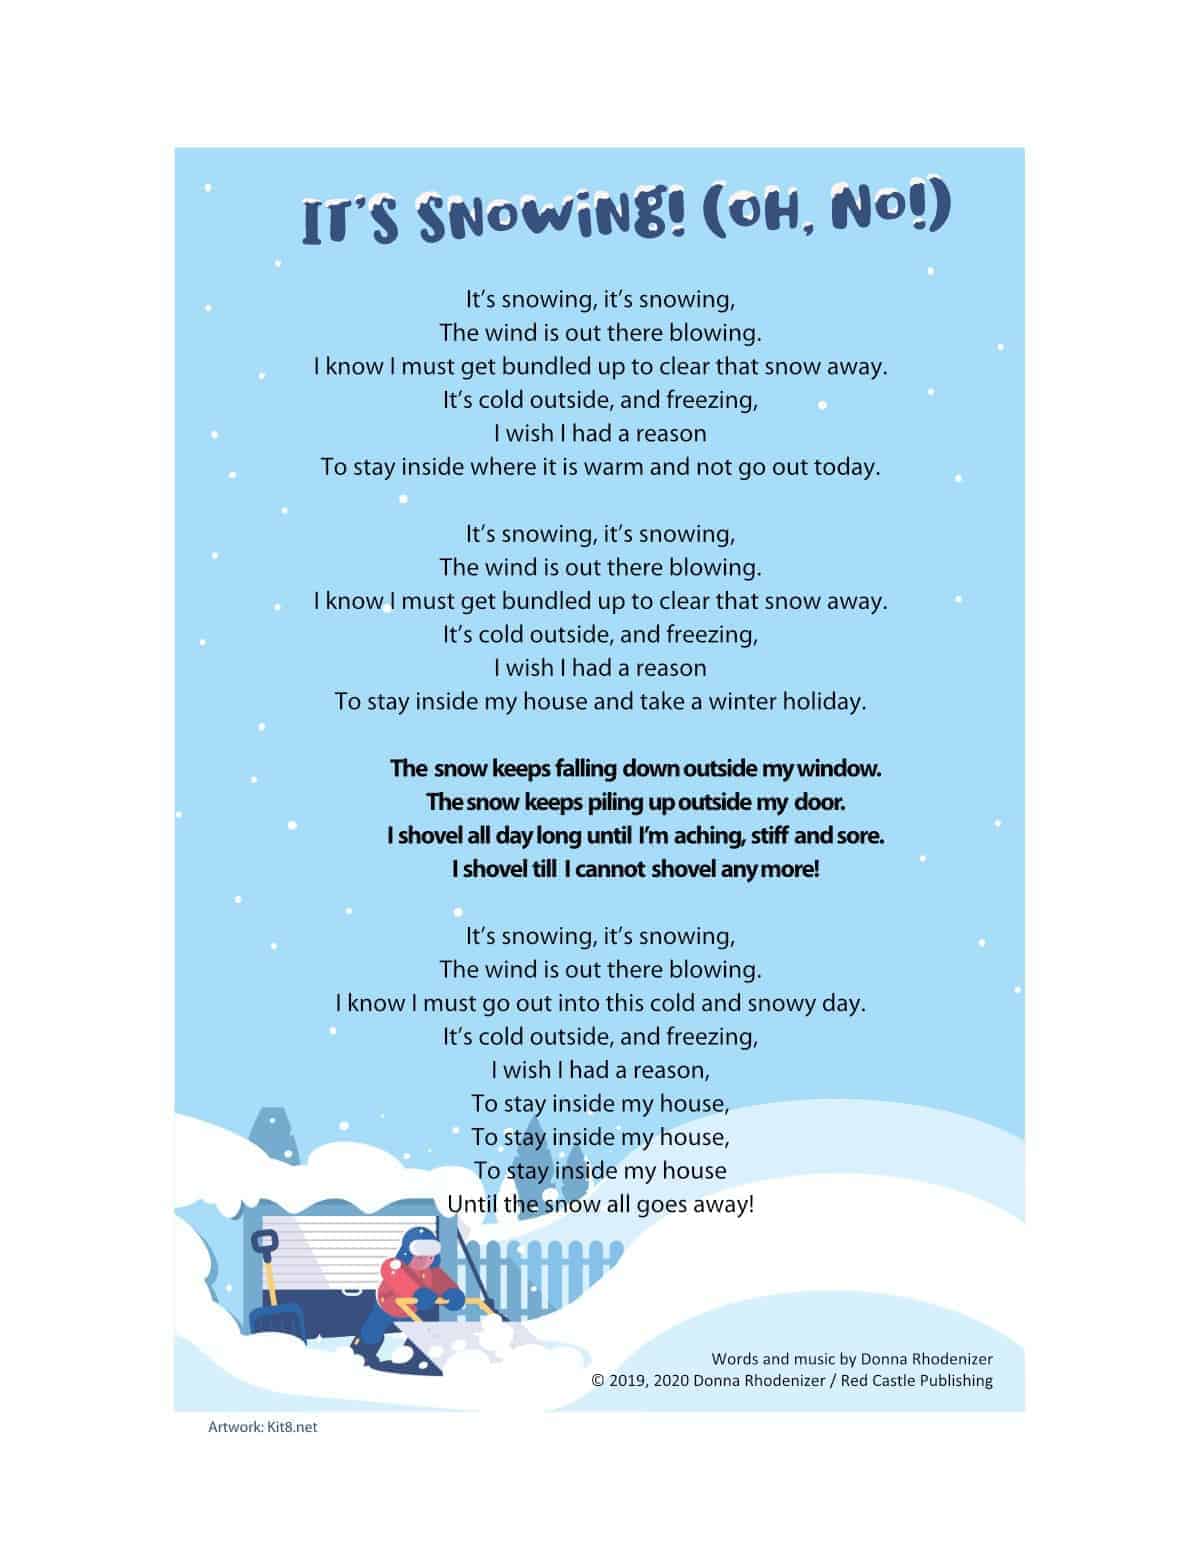 It’s Snowing! (Oh, YES!/Oh, No!) by Donna Rhodenizer